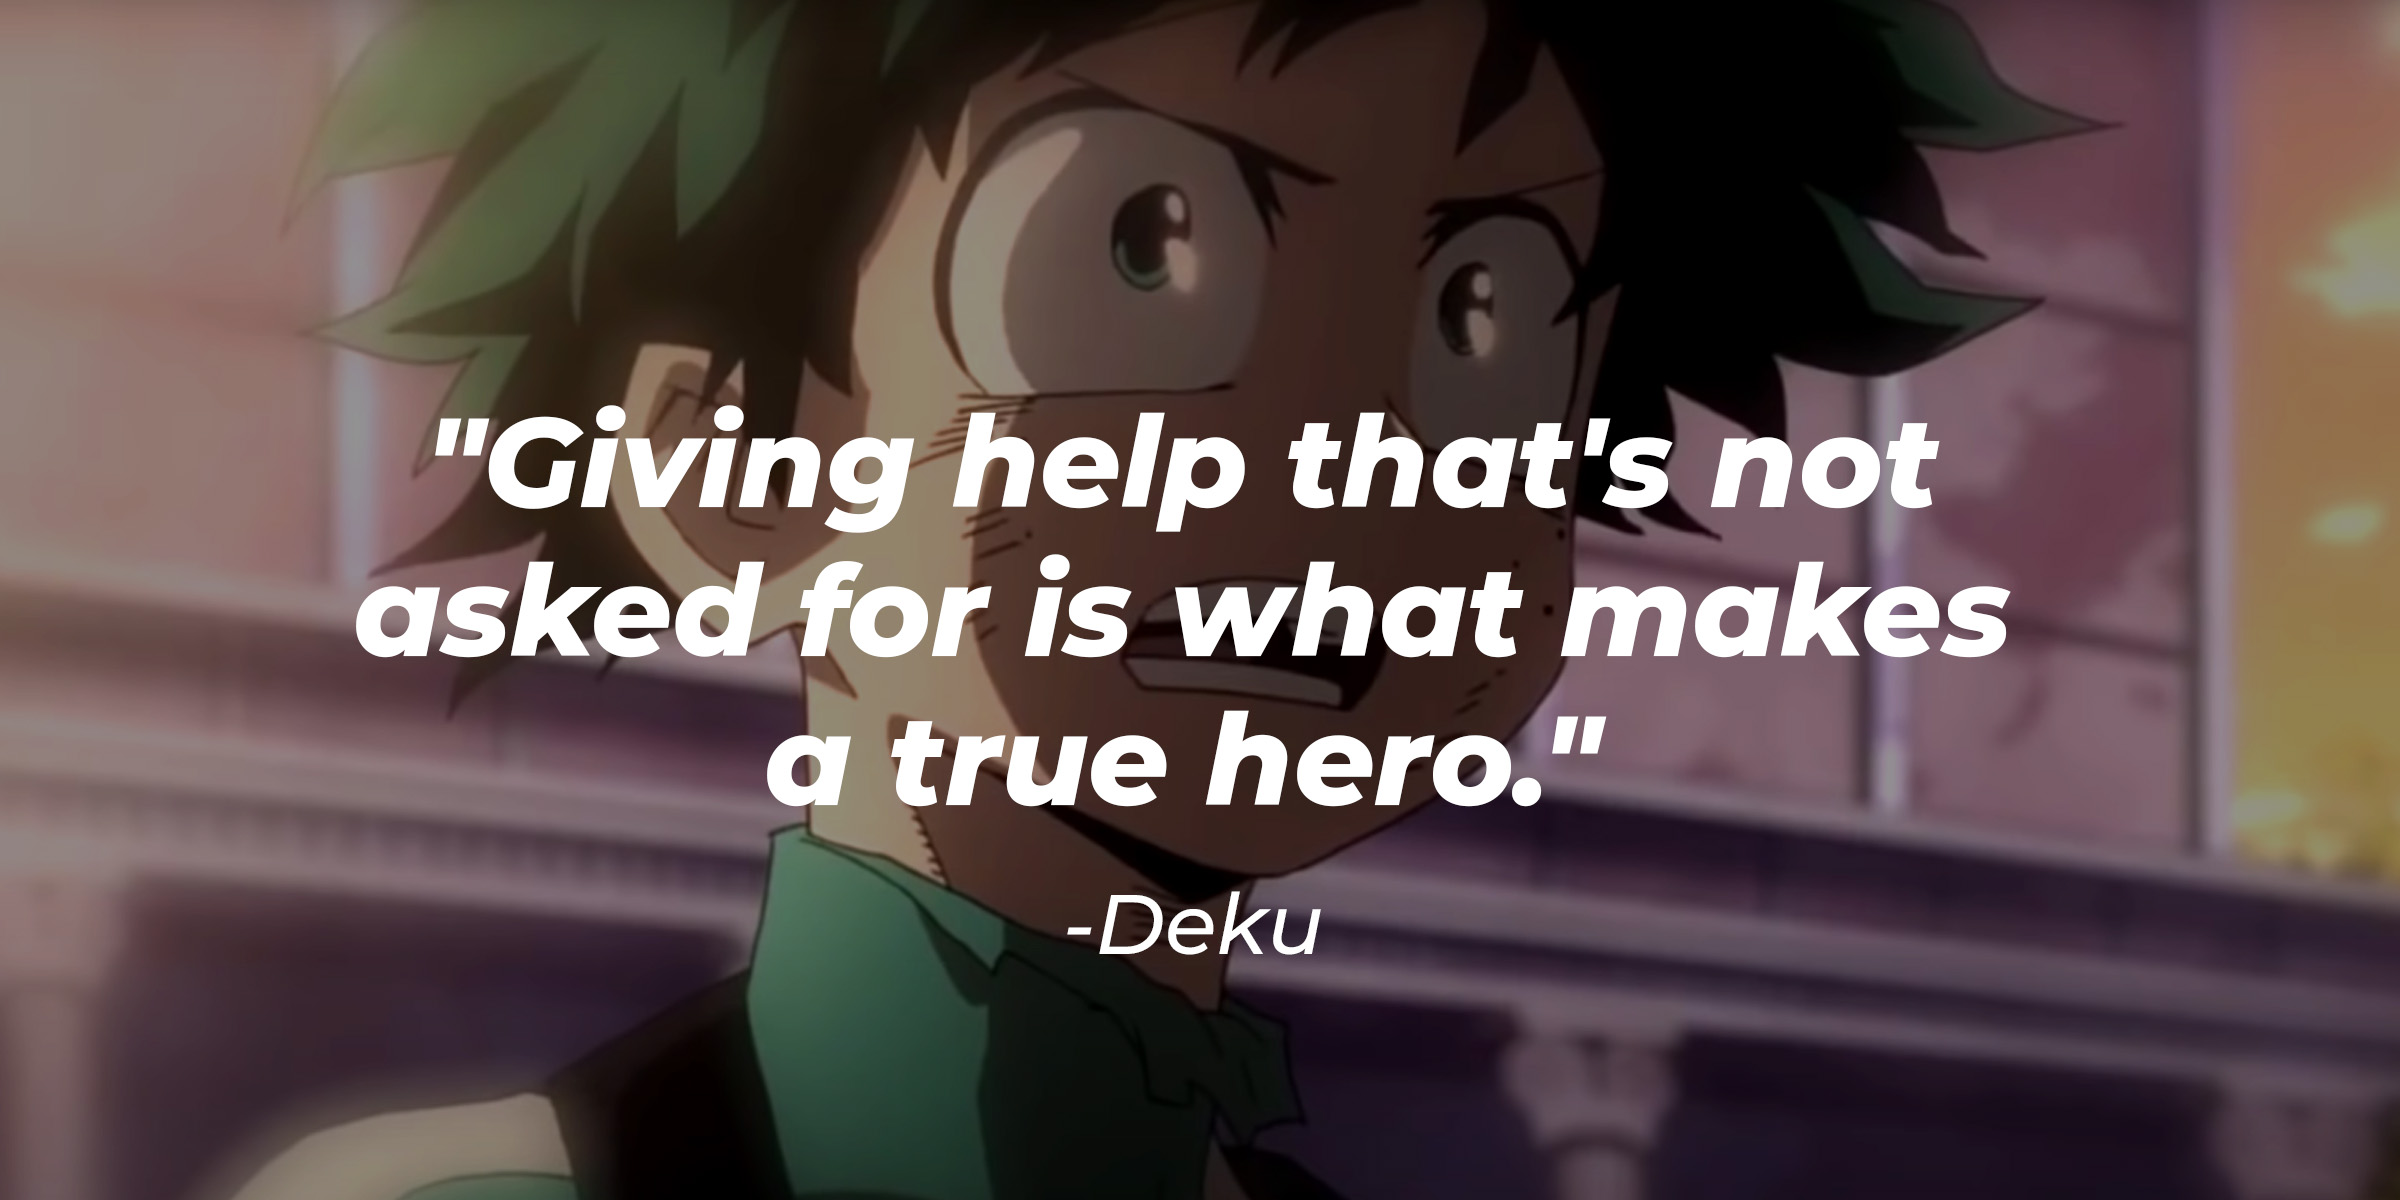 Deku's quote: "Giving help that's not asked for is what makes a true hero." | Source: Facebook/MyHeroAcademia